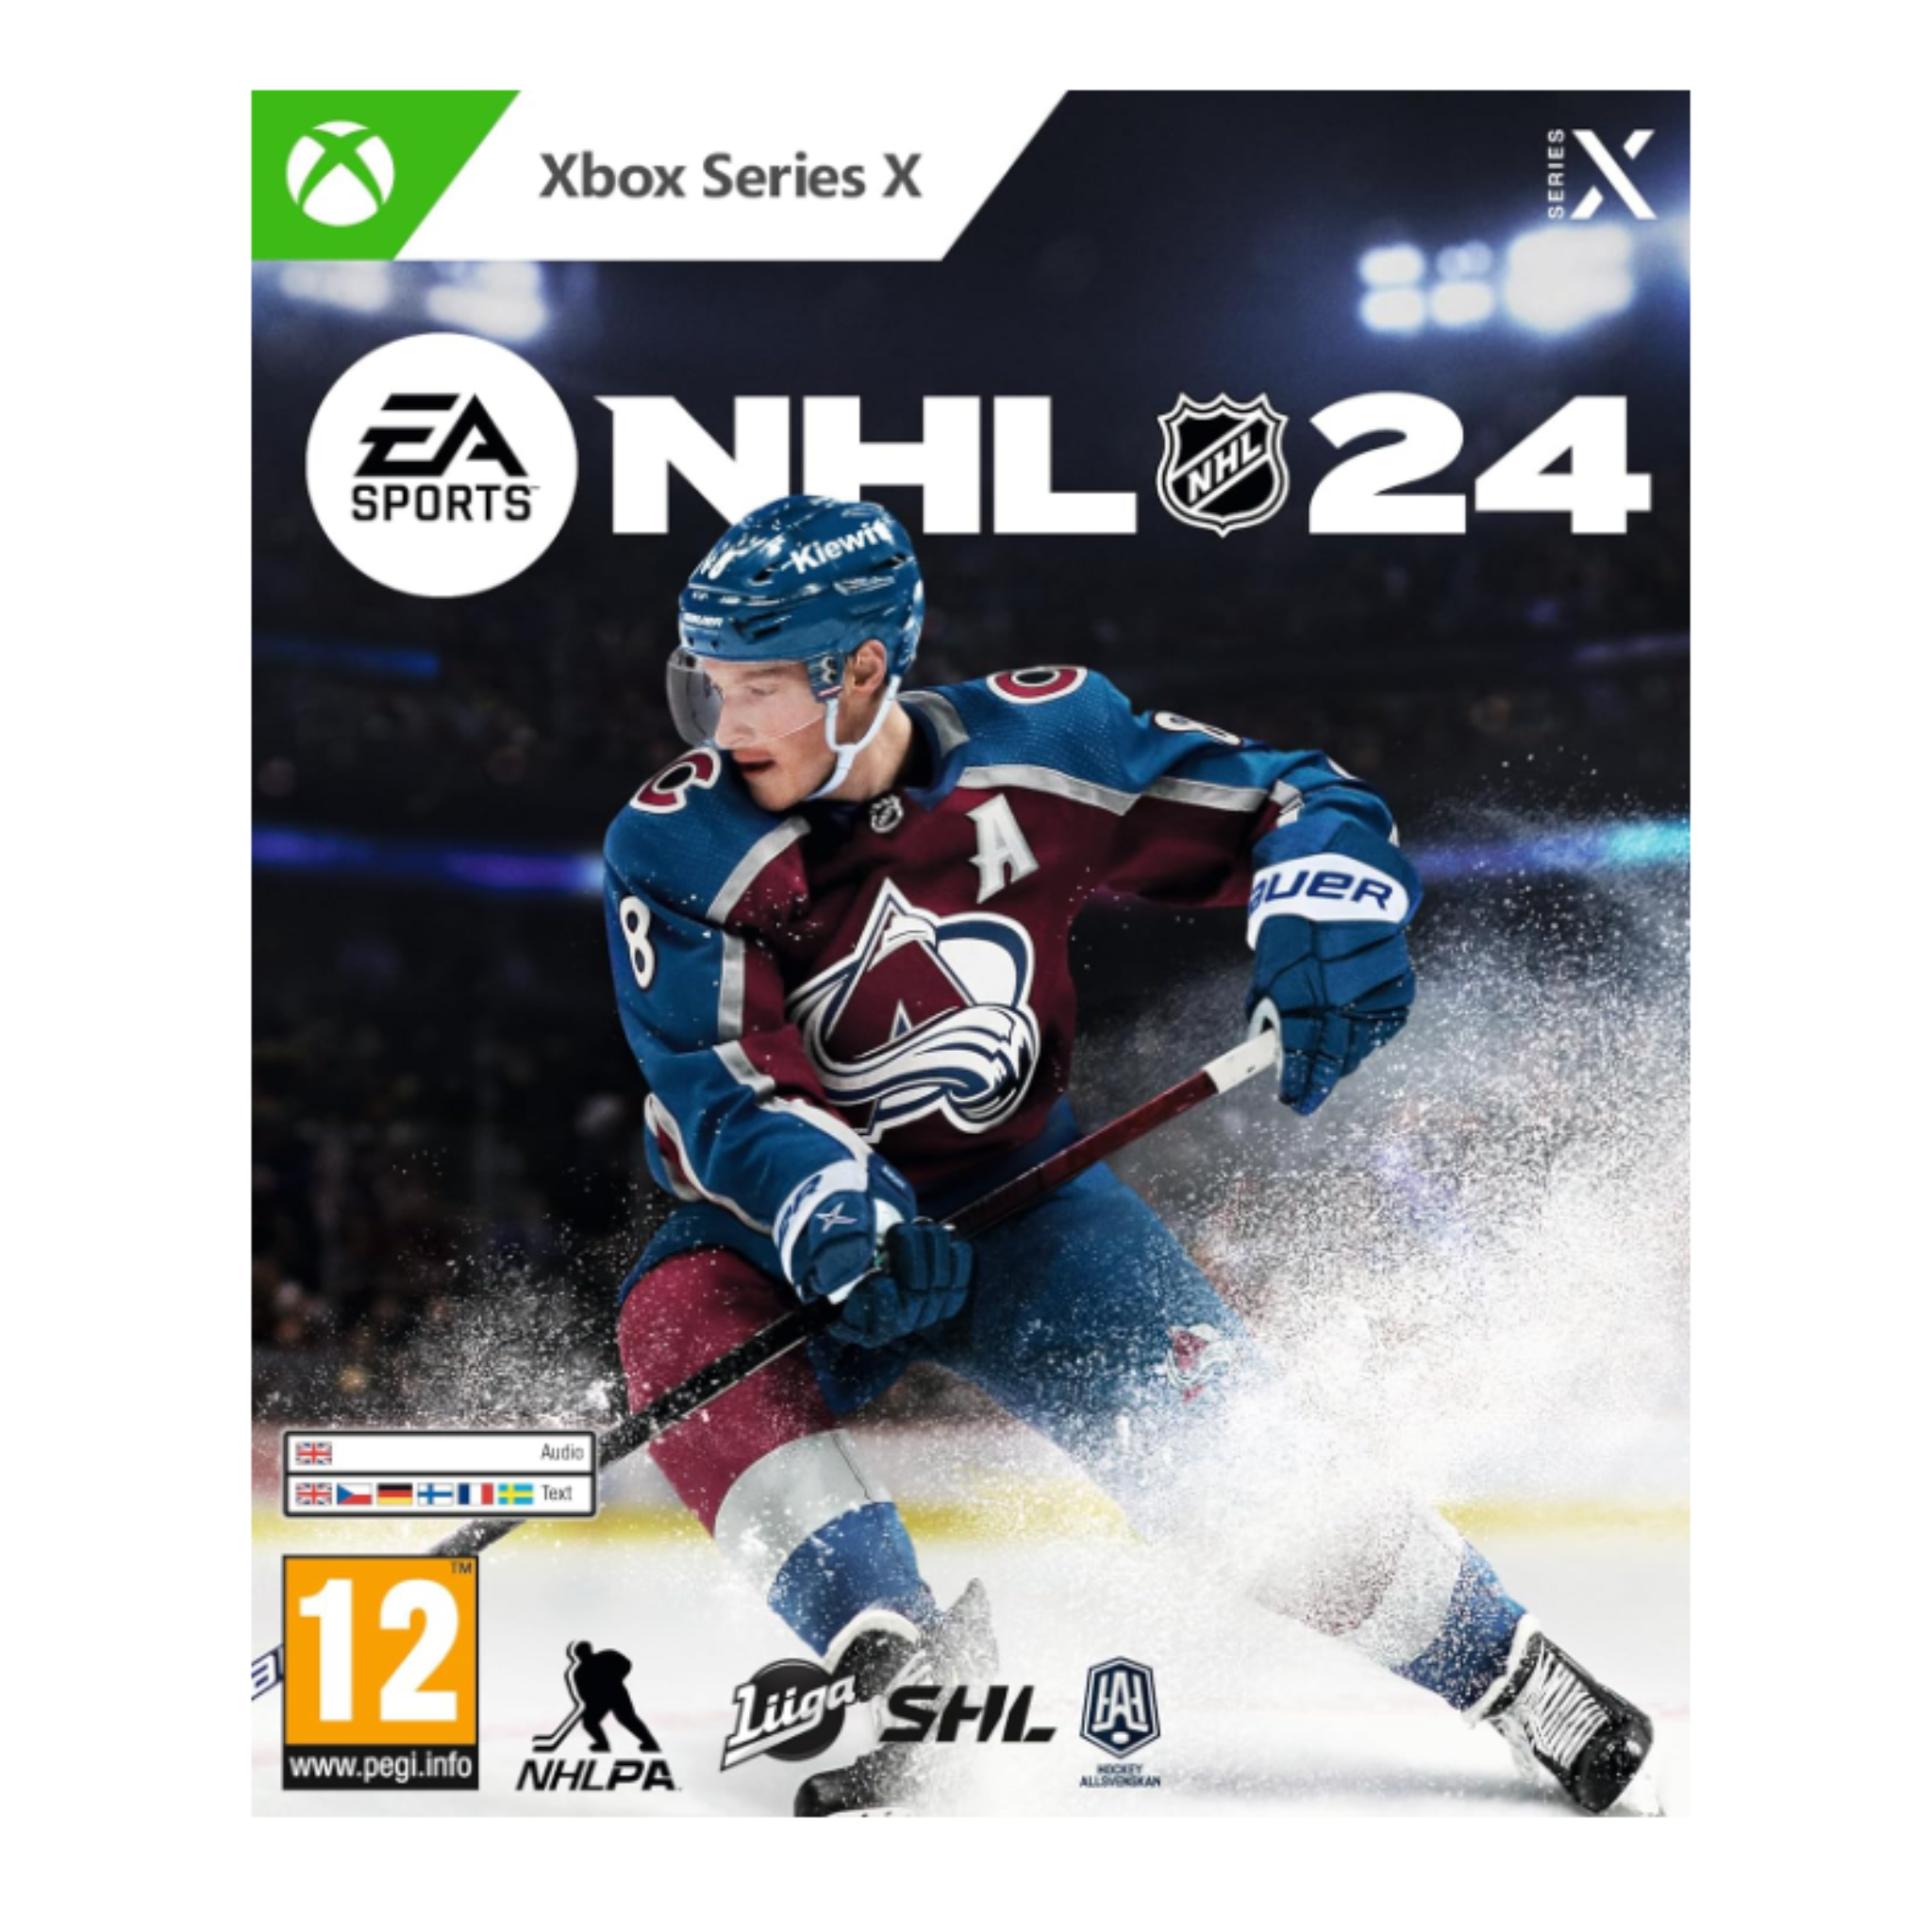 Image of NHL 24 video Game for Xbox Series X